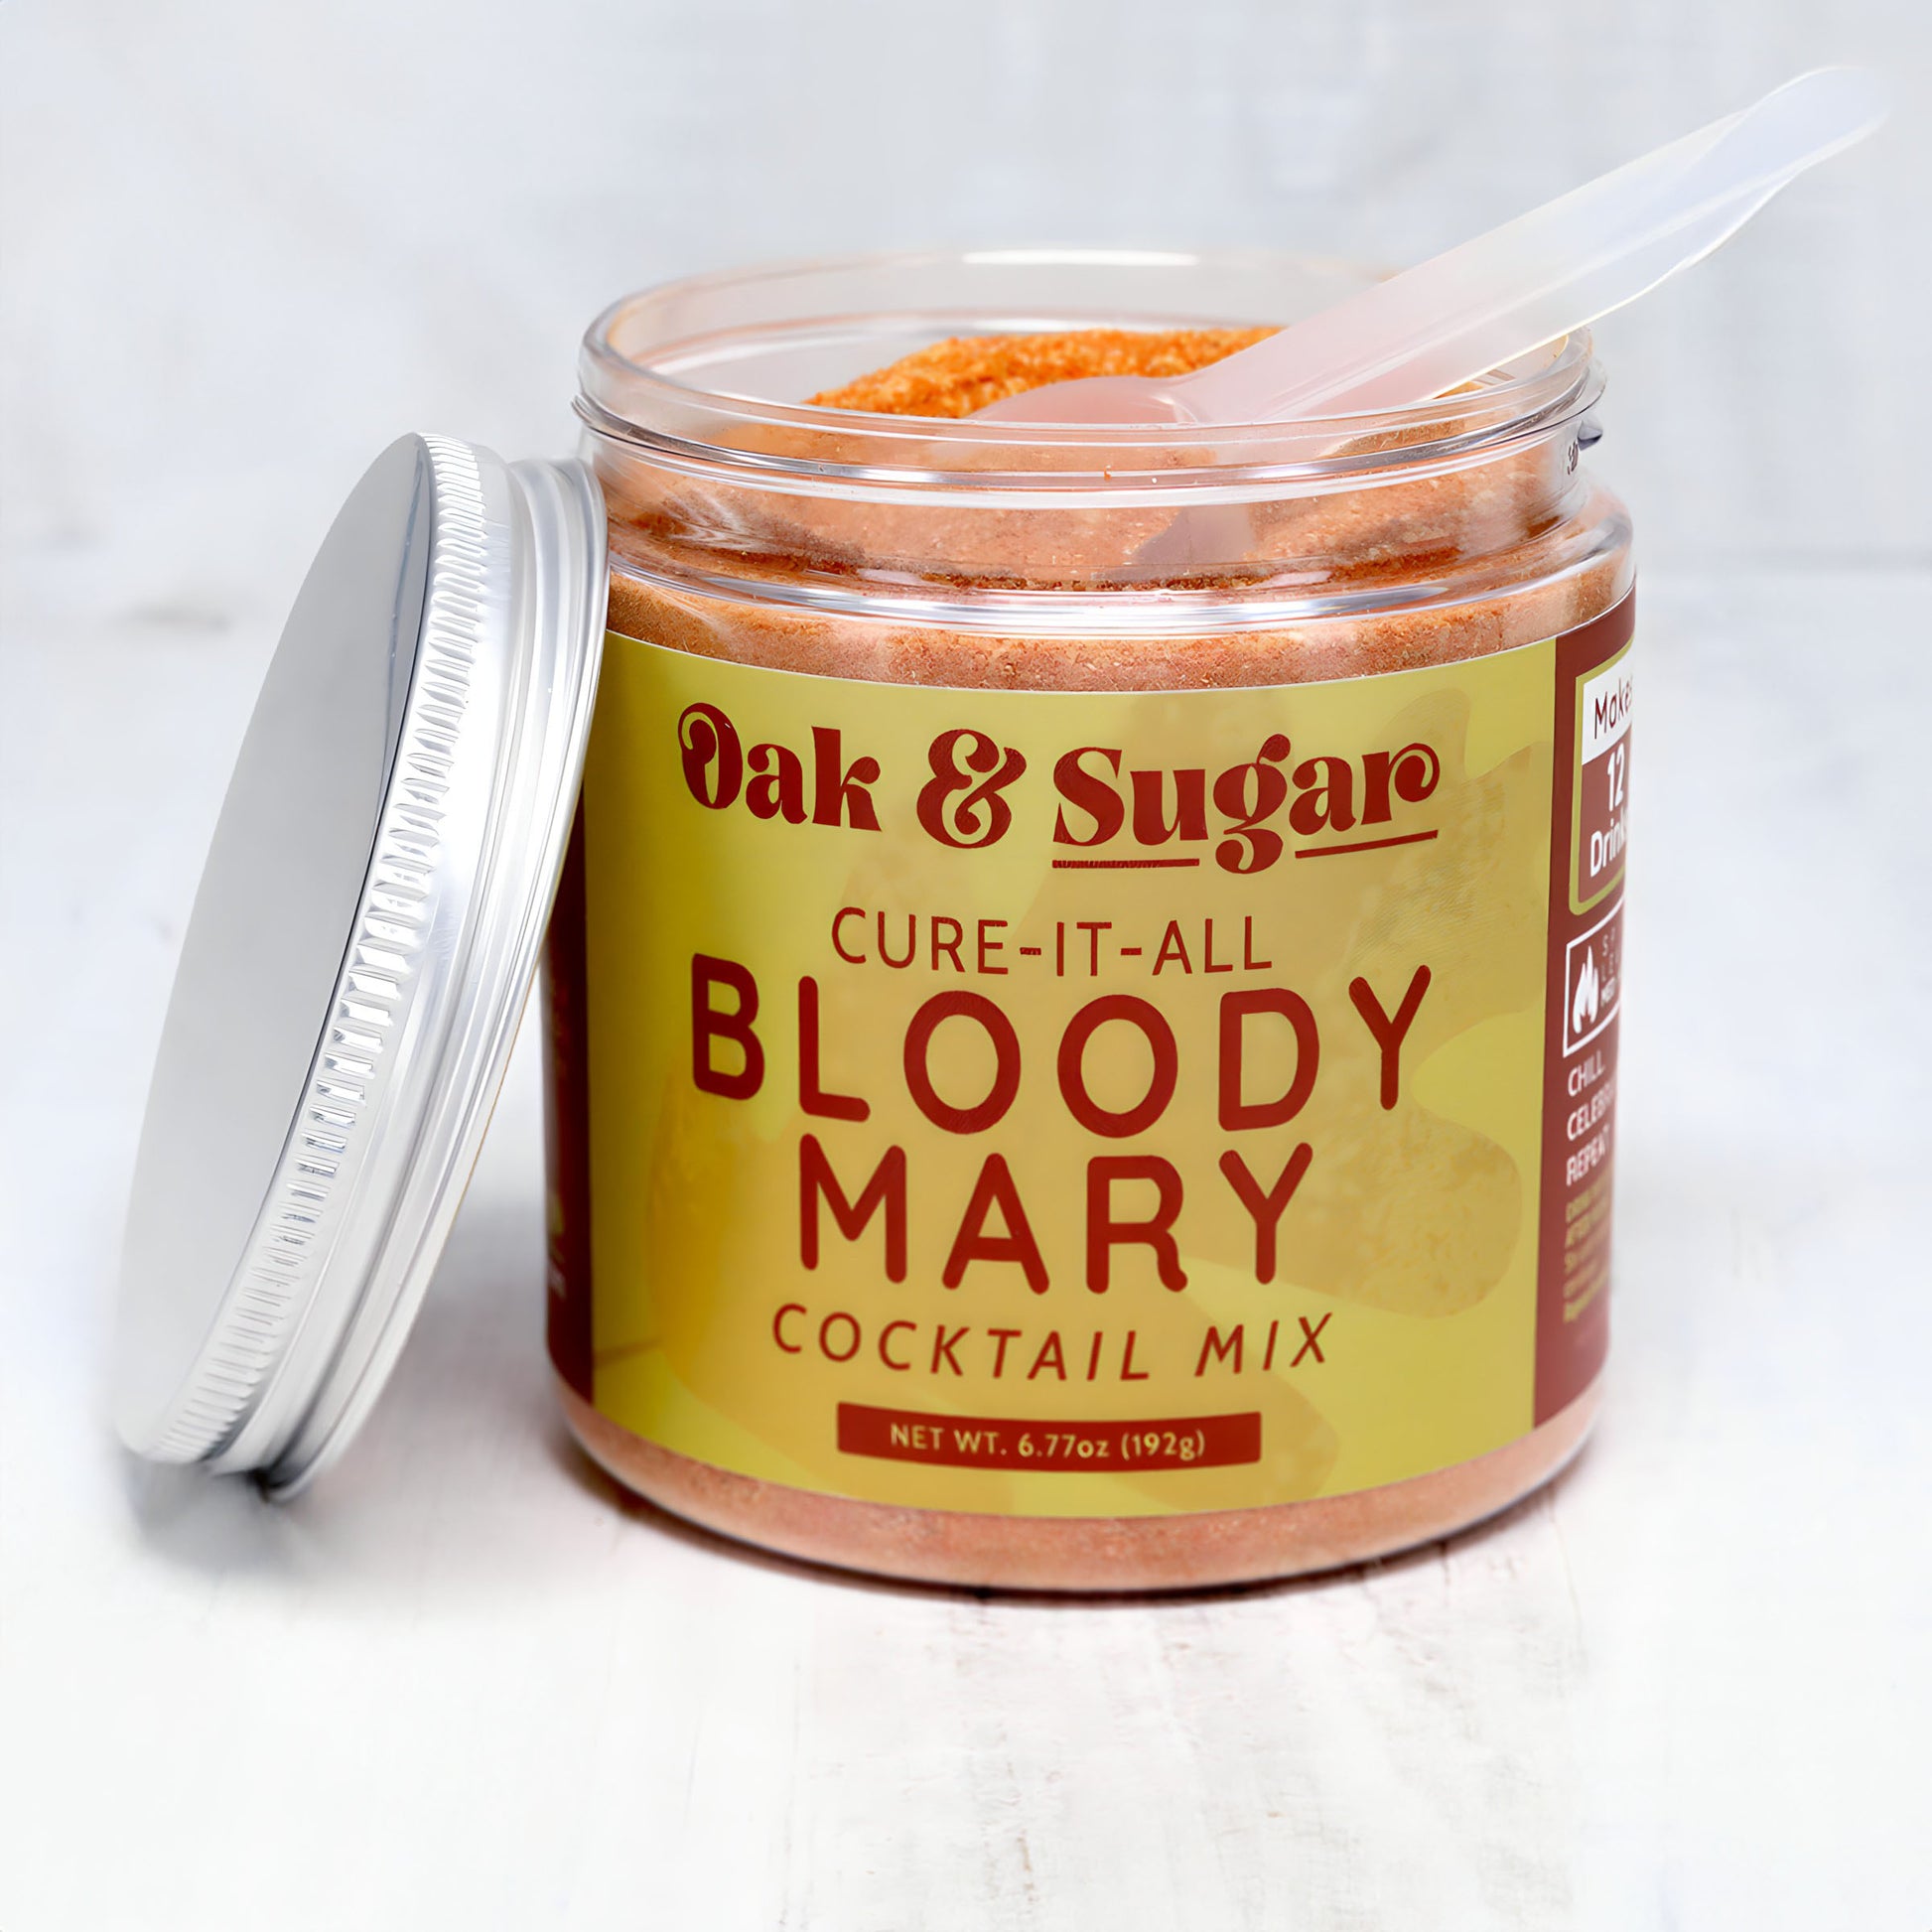 A jar of Oak & Sugar brand "Cure-It-All Bloody Mary Cocktail Mix" on a pale surface. The jar is open with the lid placed beside it and a small, clear plastic scoop sticking out of the mix. The mix, perfect for brunch cocktails, appears to be a coarse, orange-colored powder.